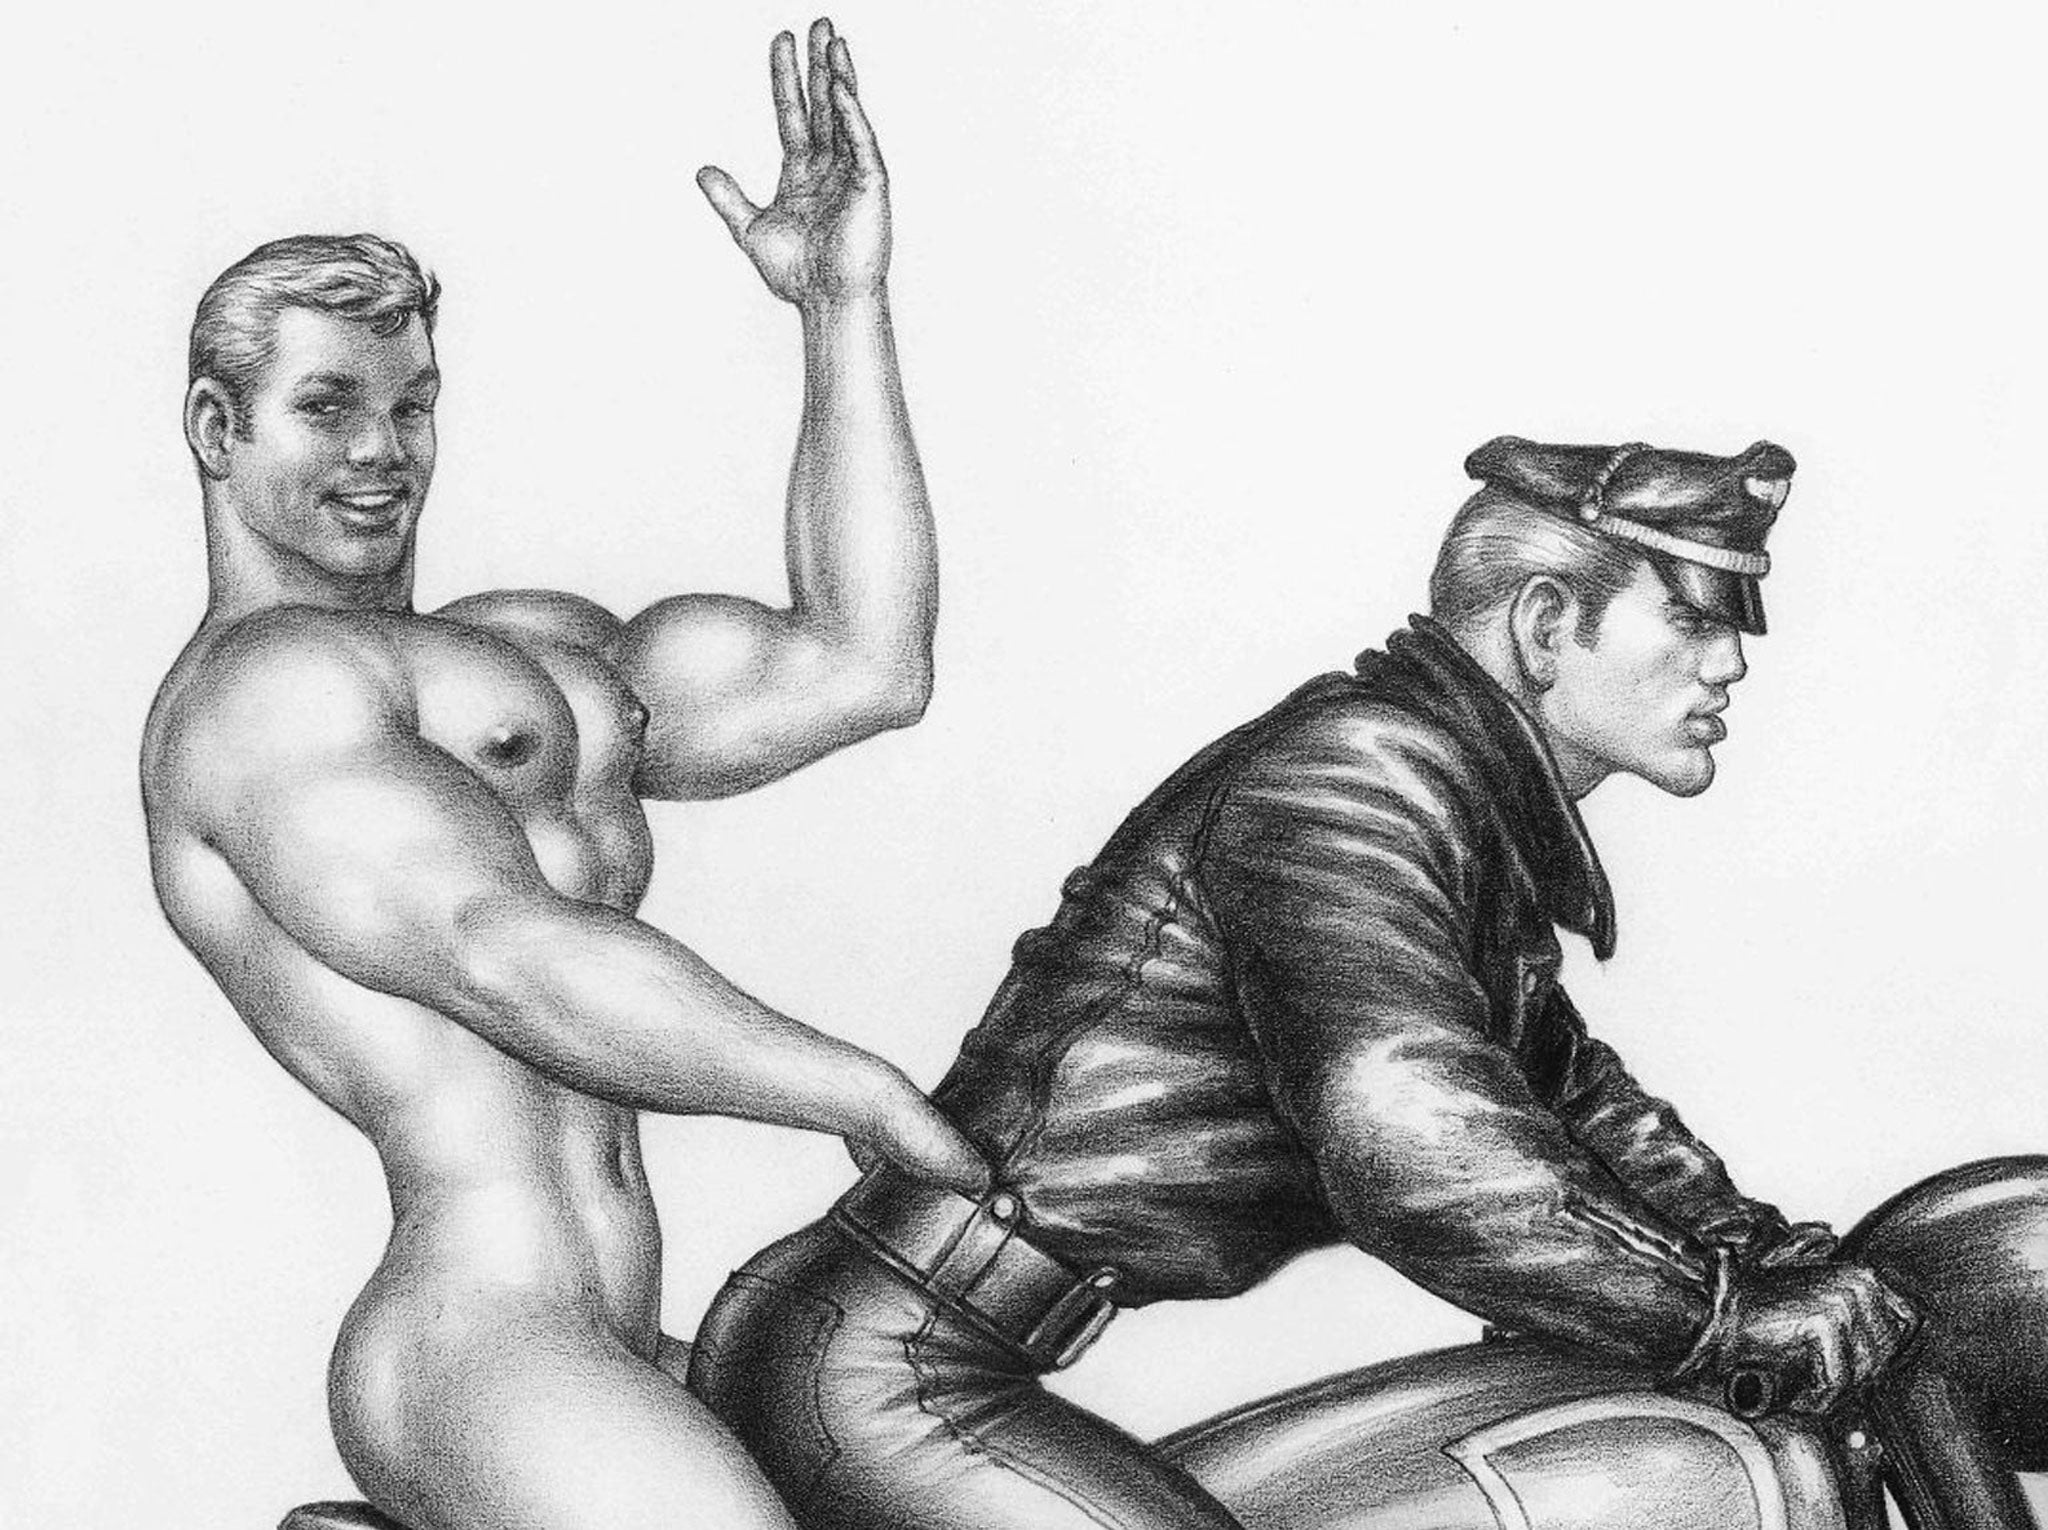 ICA: Keep Your Timber Limber (Works on Paper), Tom of Finland